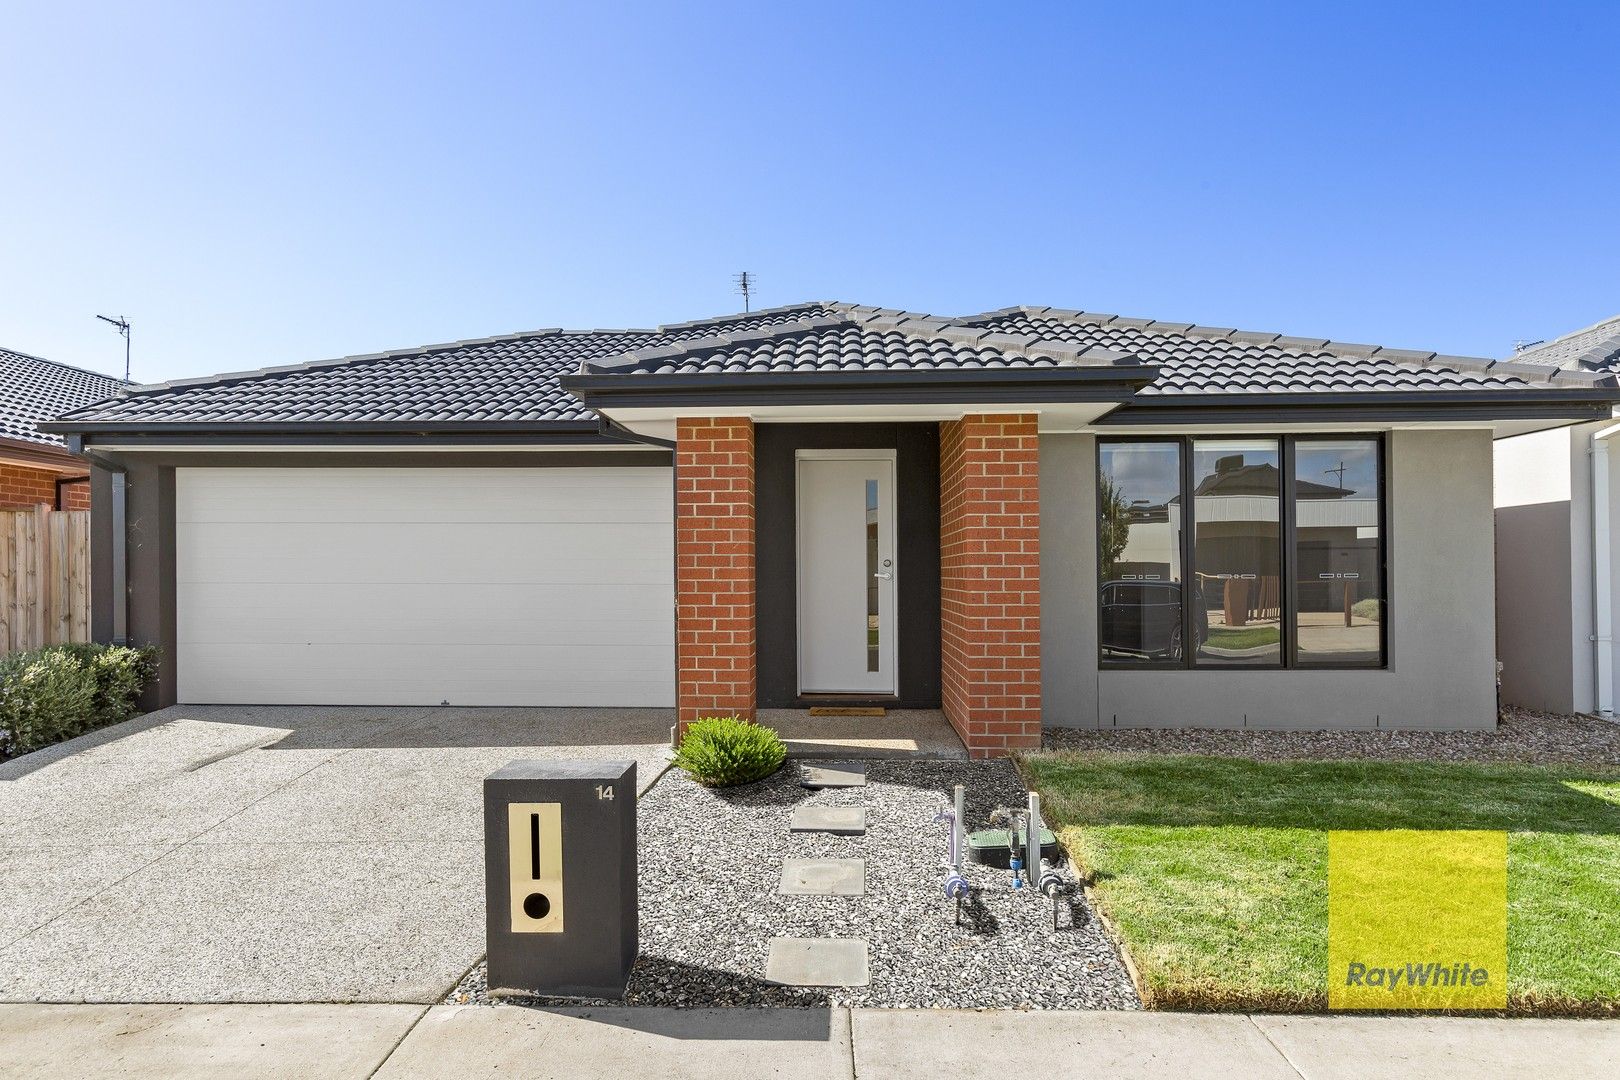 4 bedrooms House in 14 Fawkner Crescent ARMSTRONG CREEK VIC, 3217